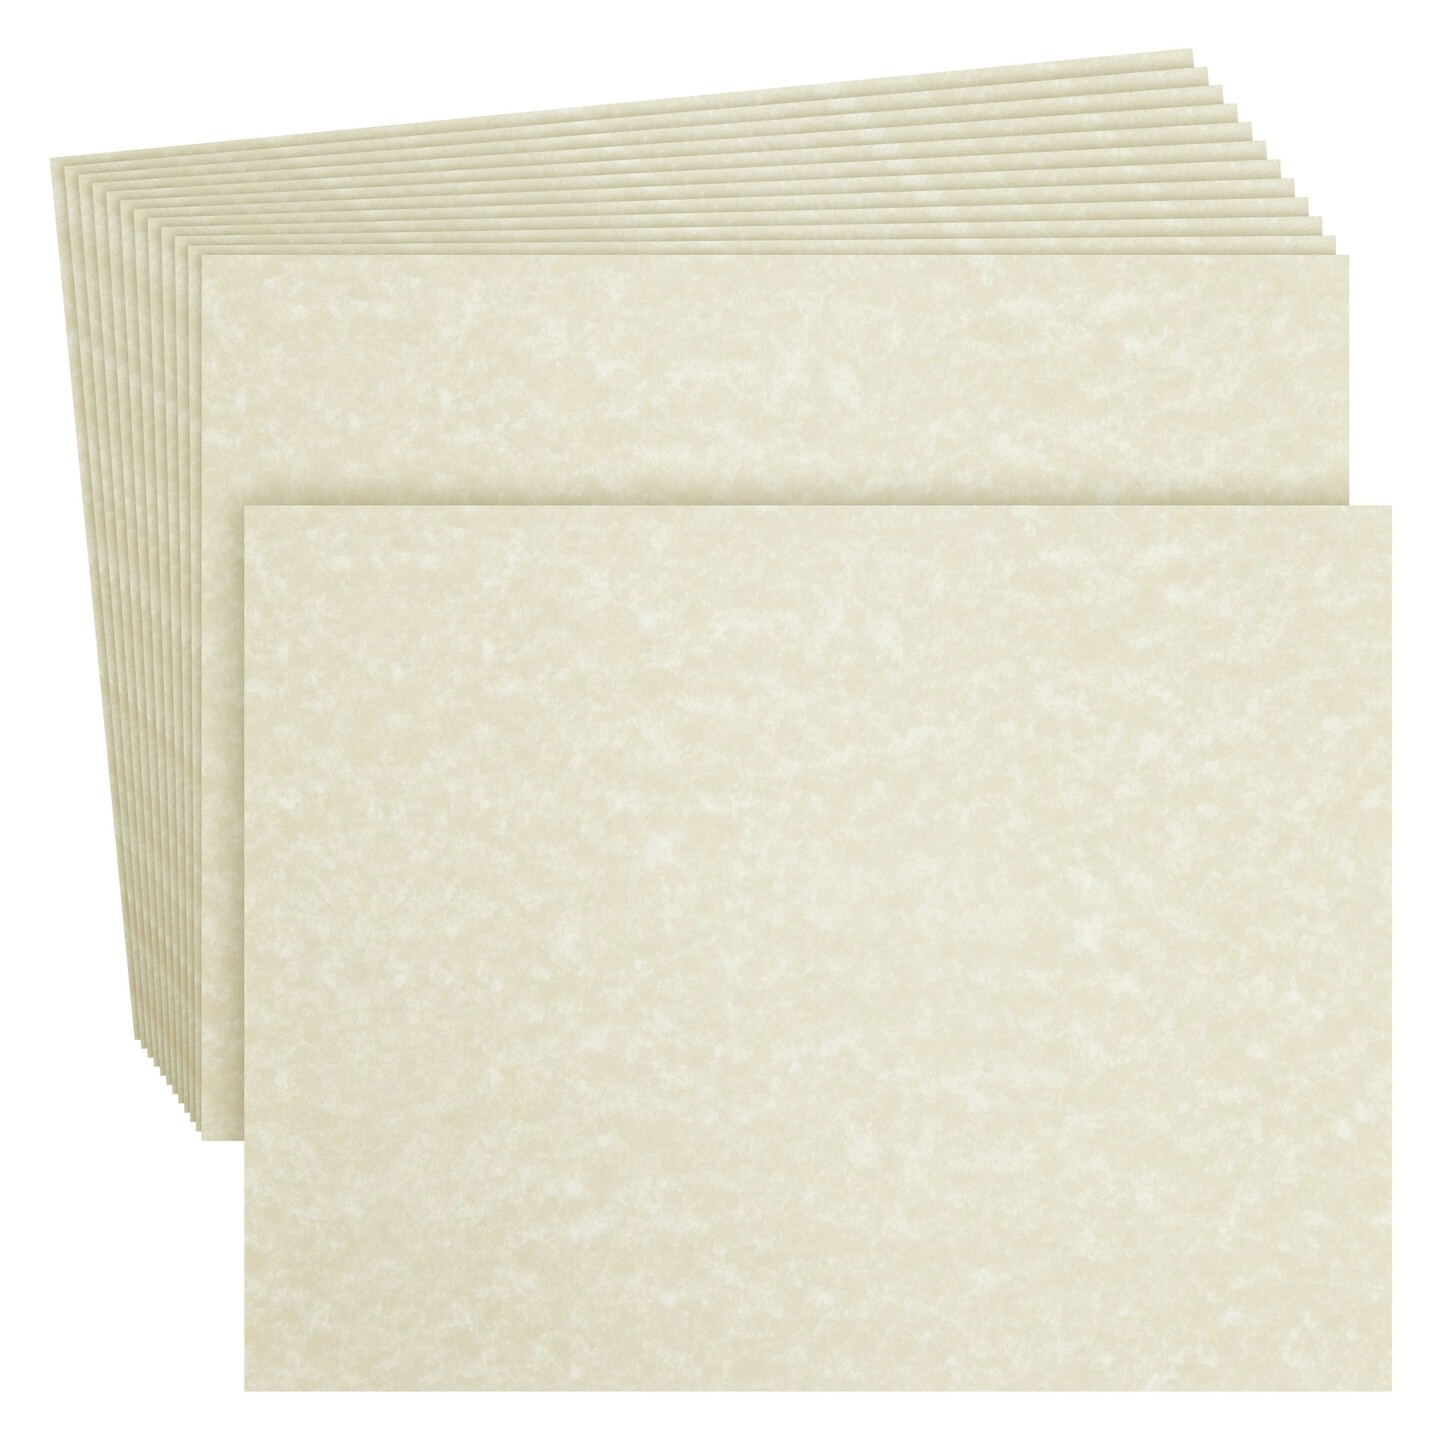 textured paper for printing